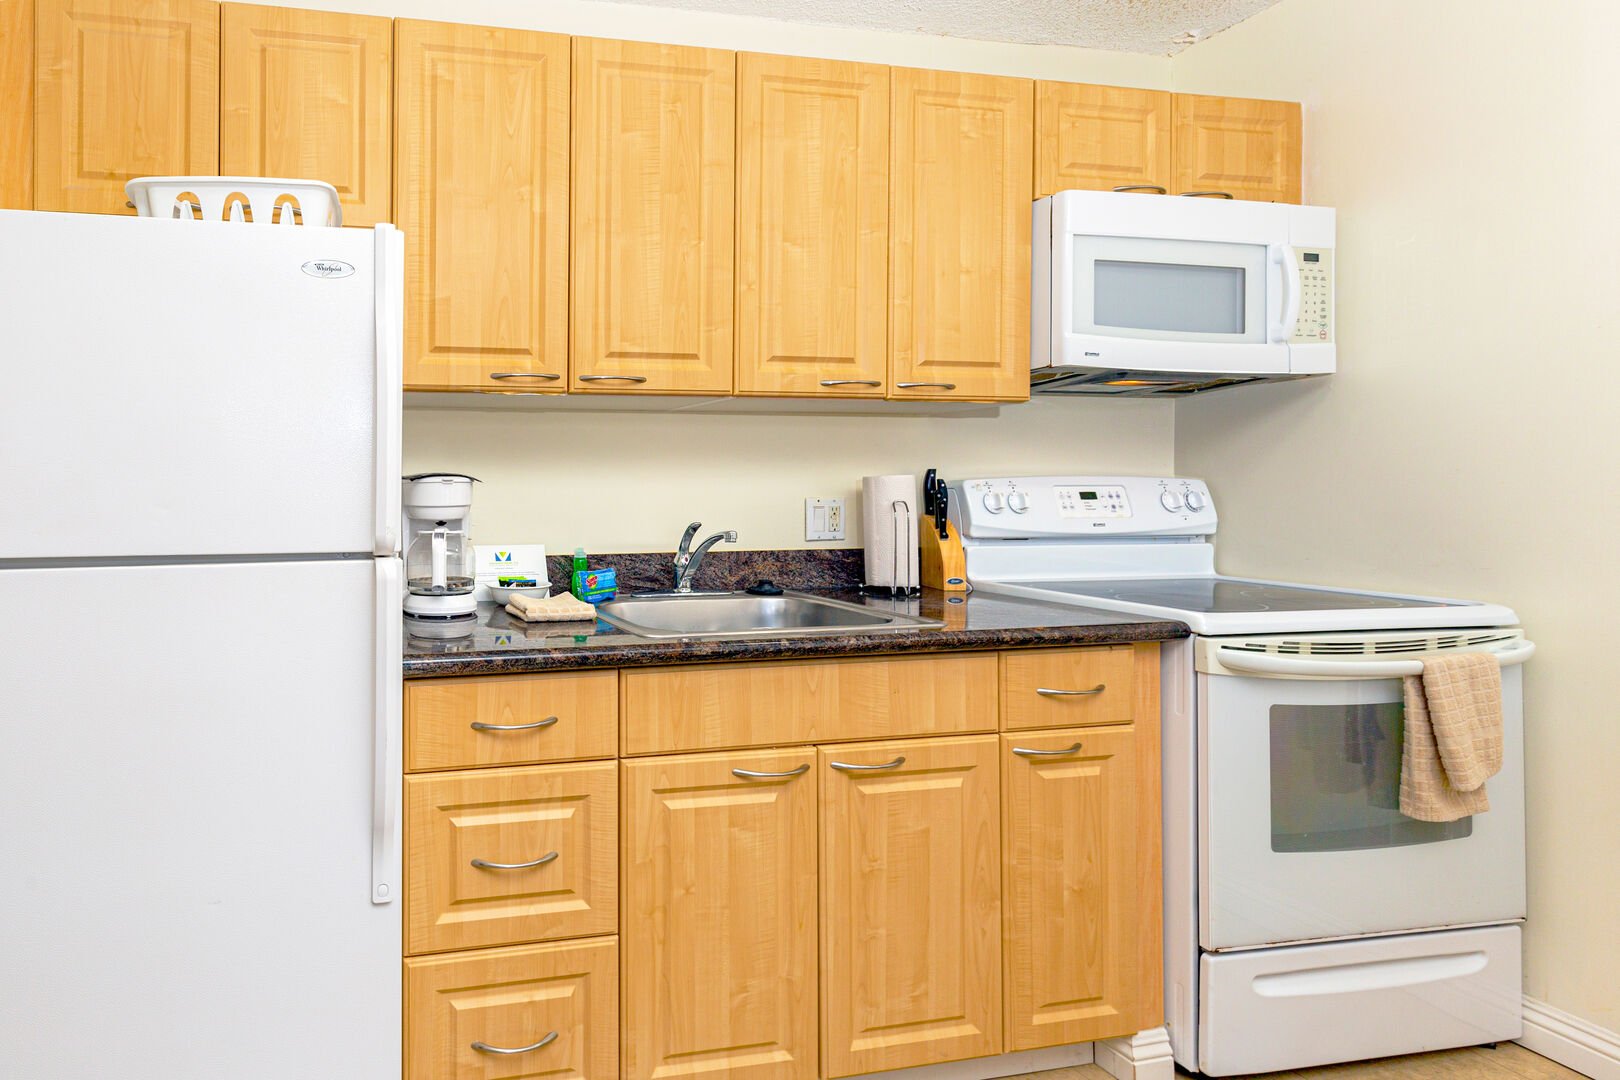 Full kitchen includes refrigerator, stove, oven, and microwave